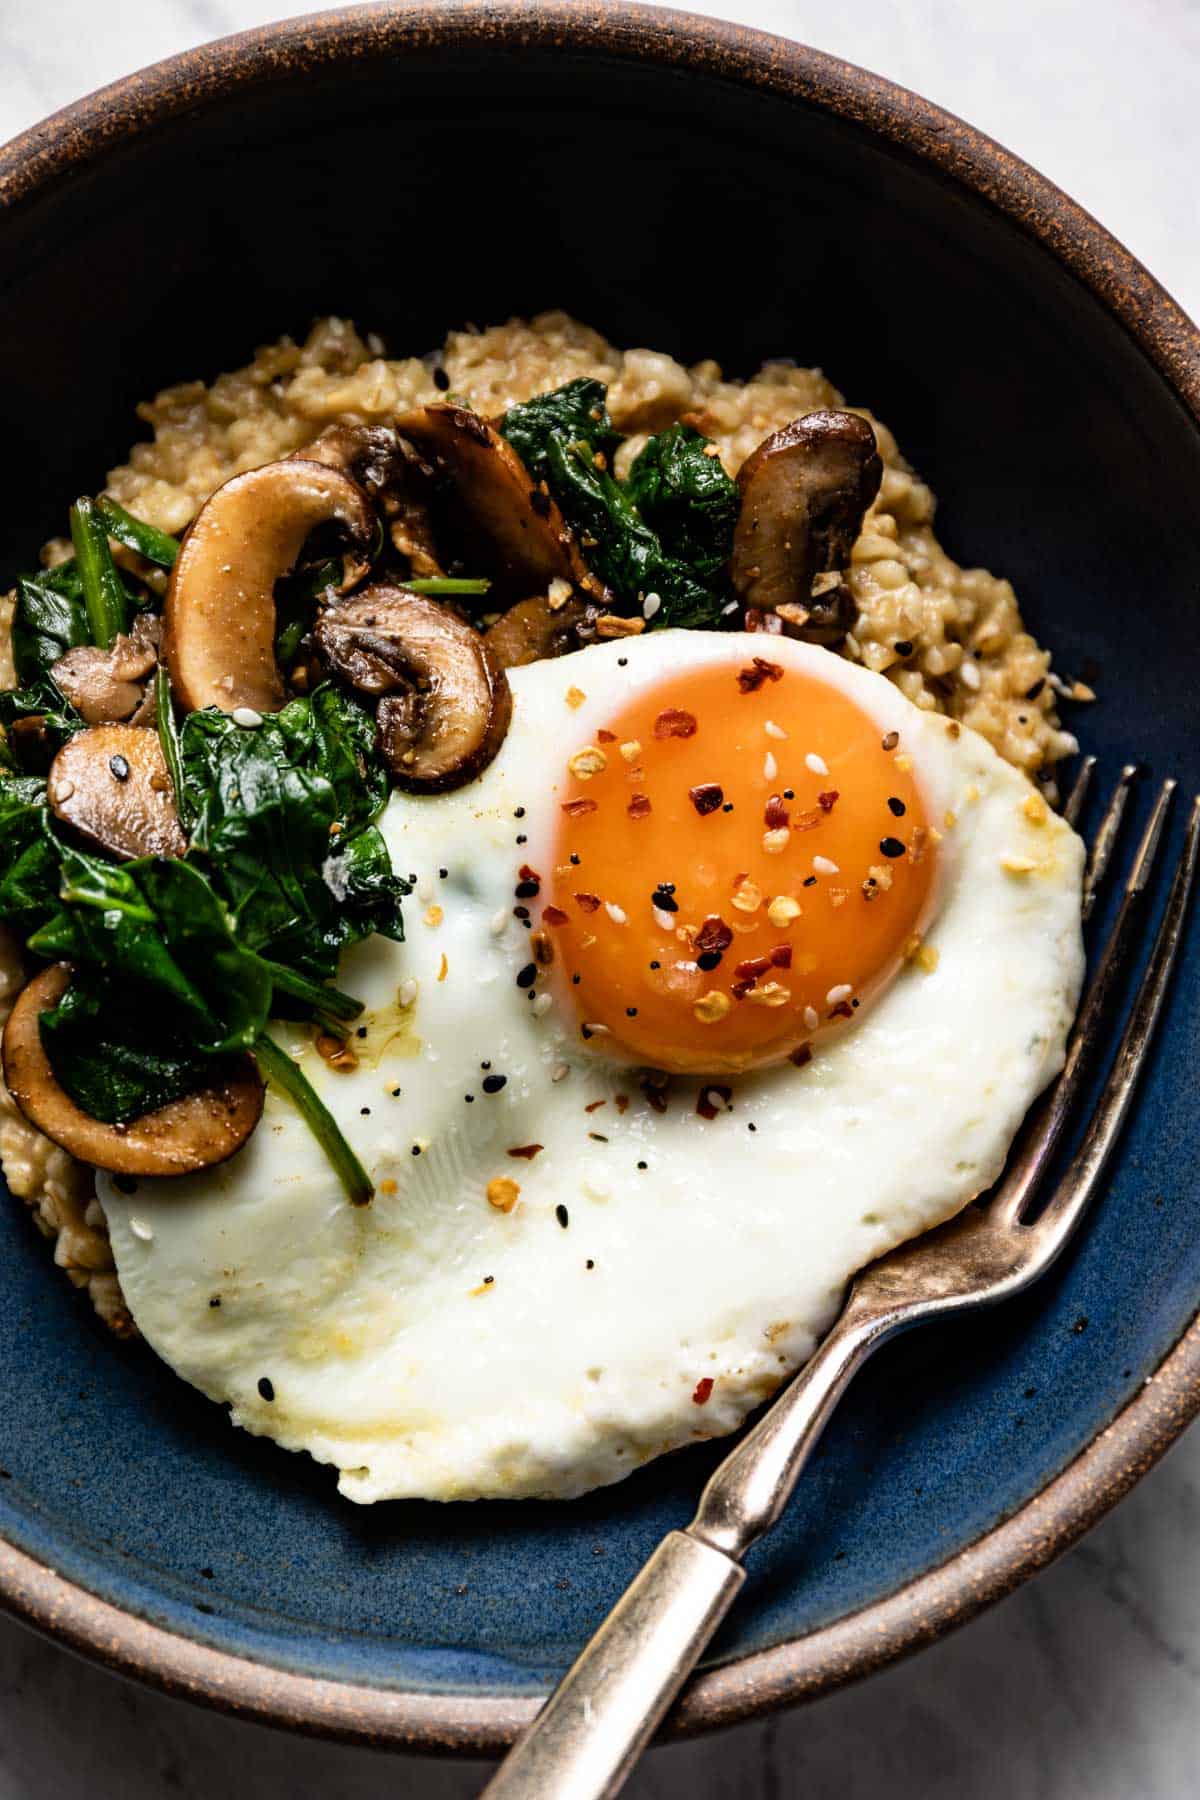 A bowl of oats topped with an egg, mushrooms, and spinach from the top view.